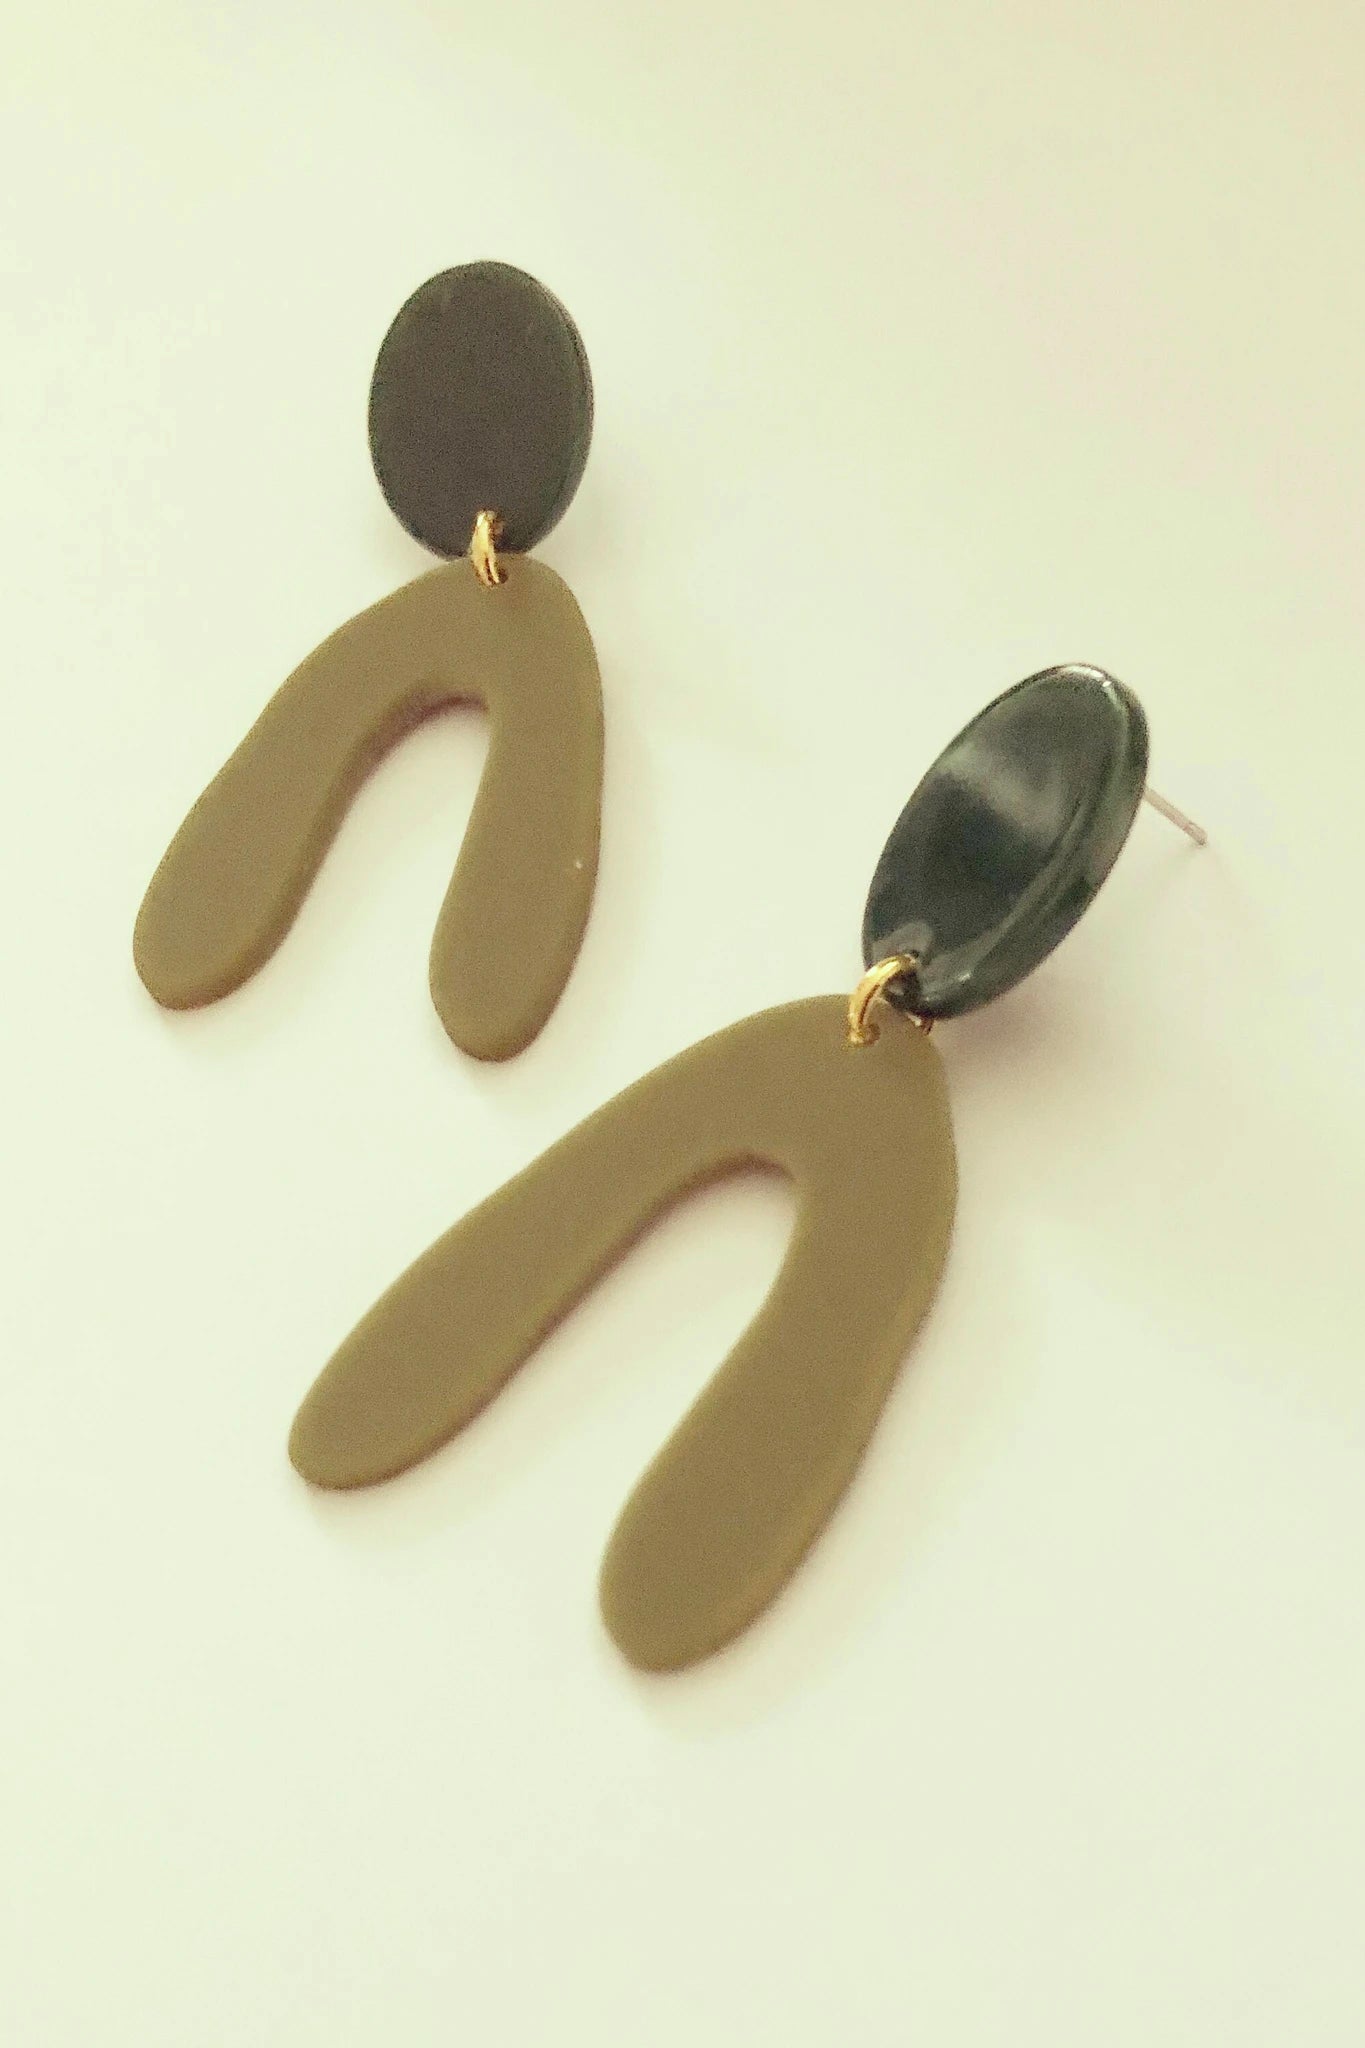 Kuvve dangle earrings by Darlings of Denmark; olive green arches hanging off a black oval shape; geometric, graphic earrings; acrylic acetate and raw brass; flat lay